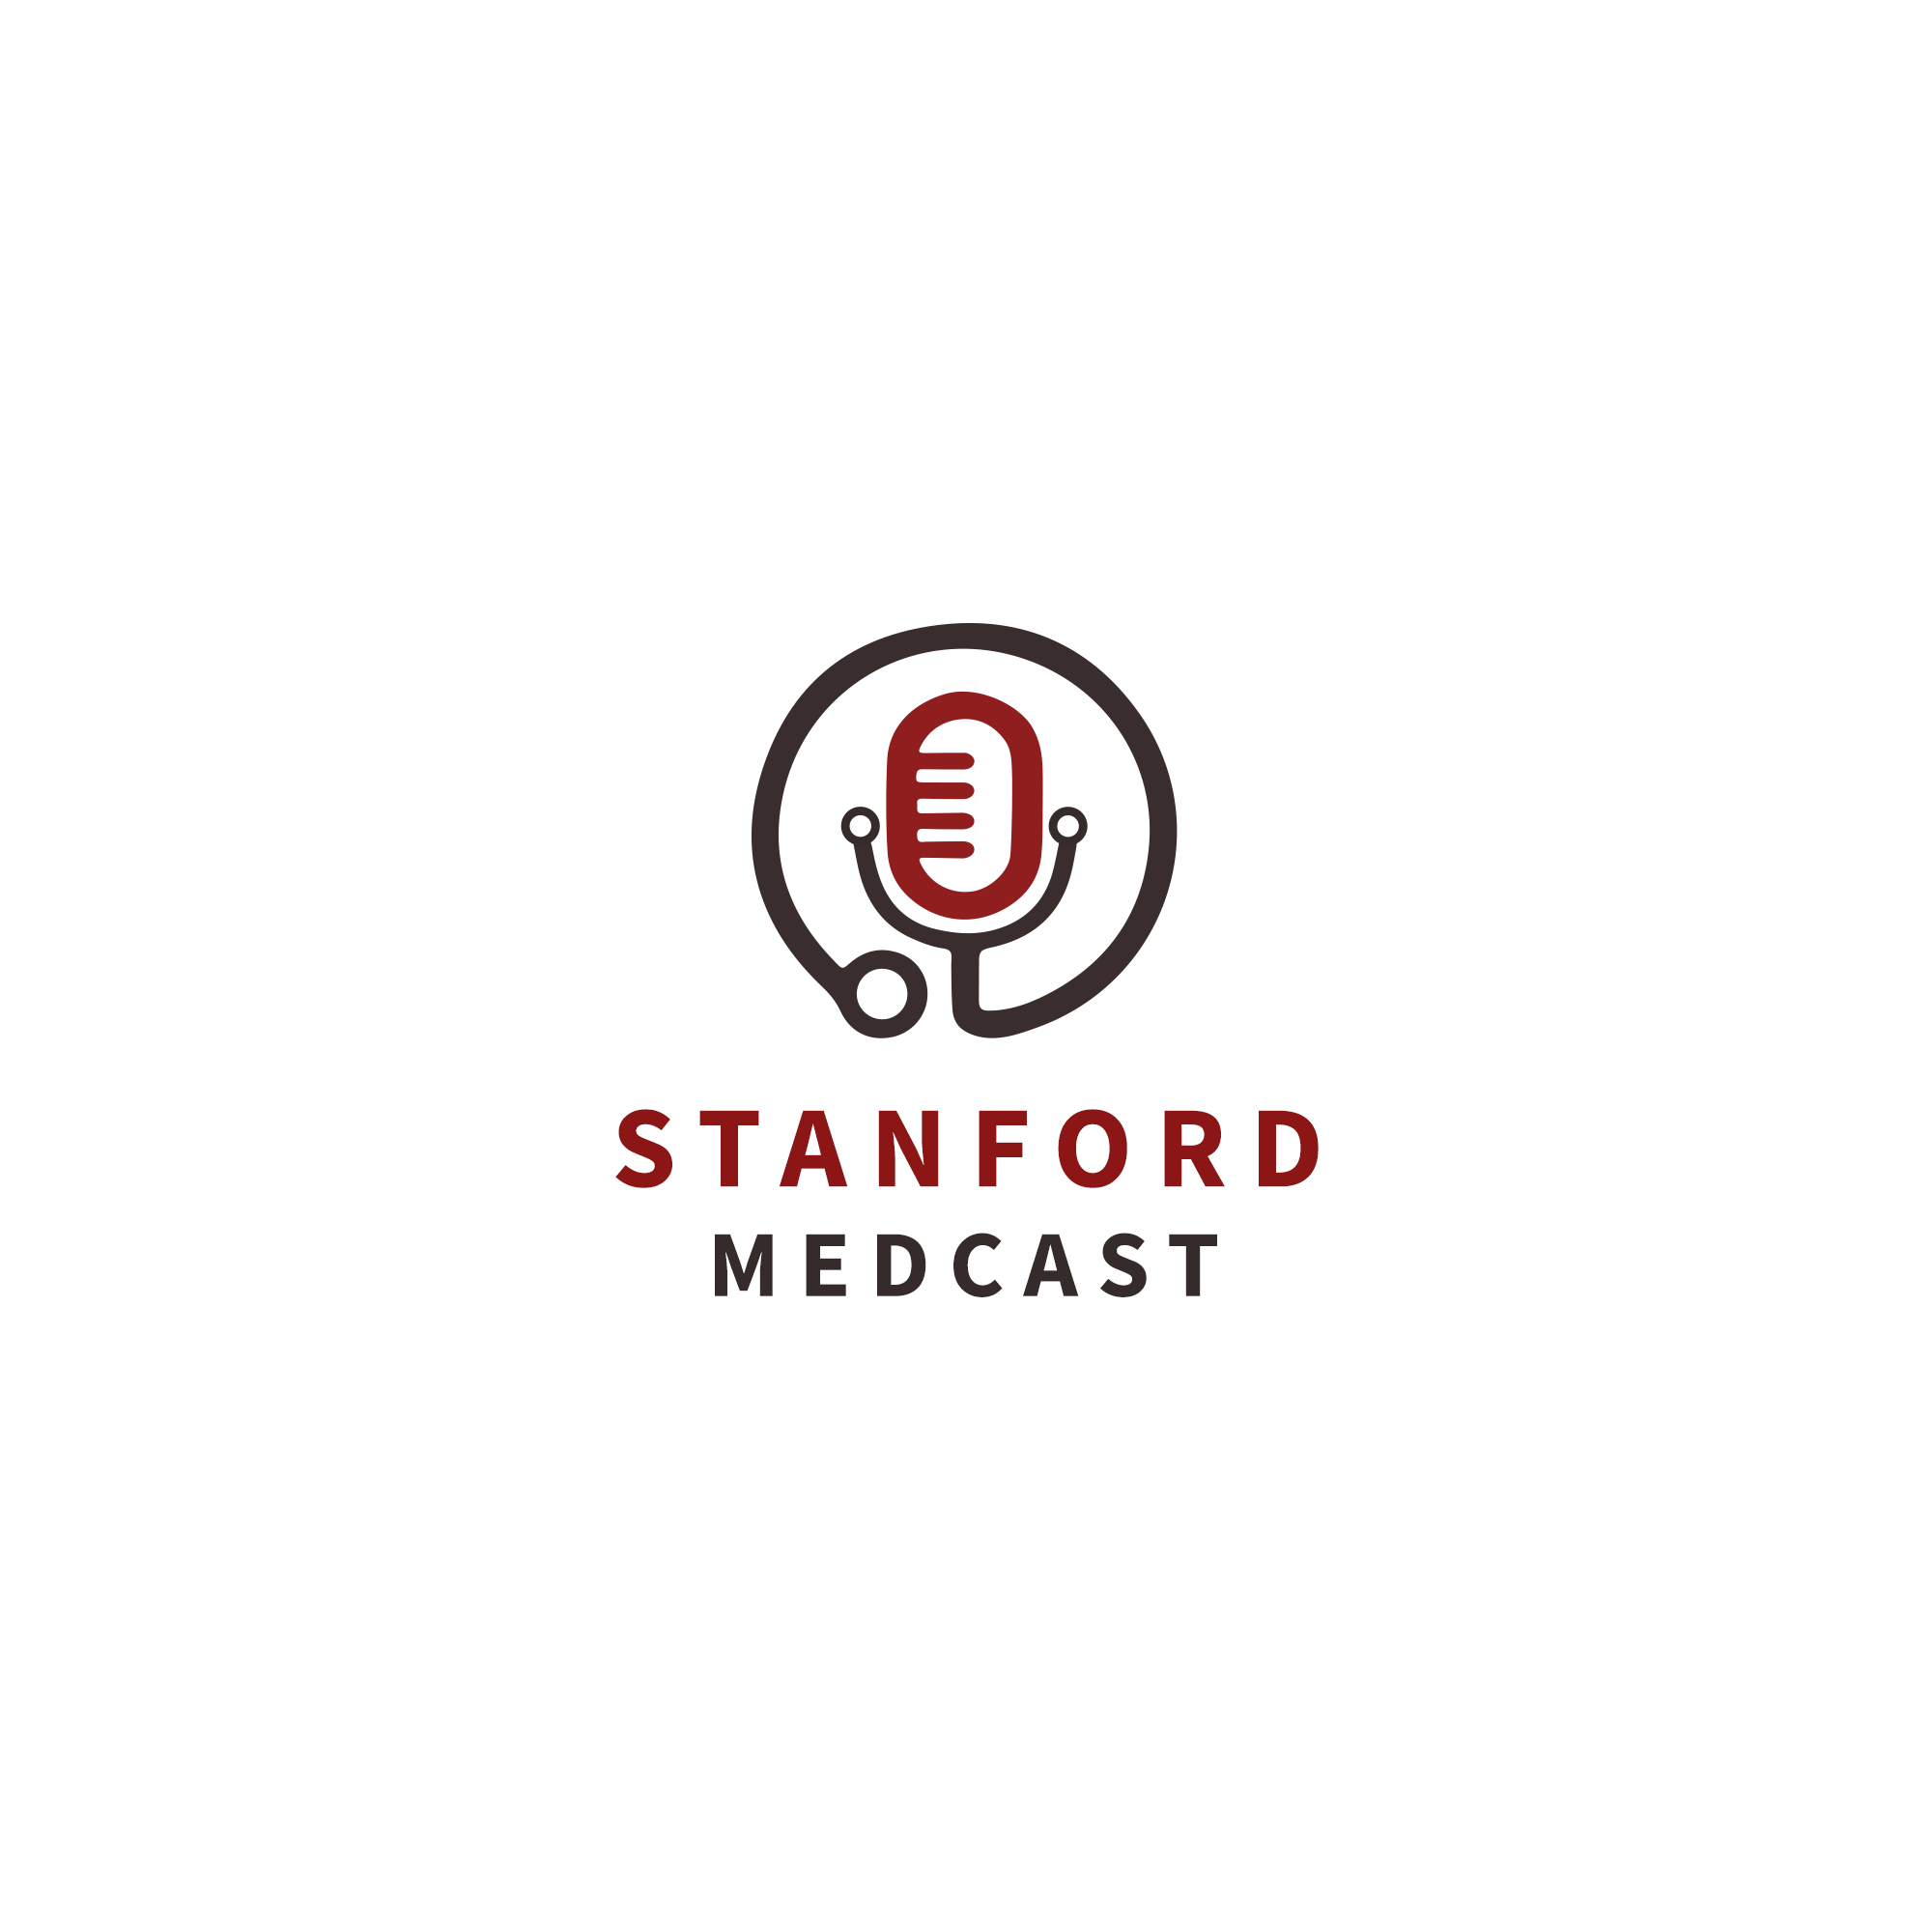 Stanford Medcast Episode 77: Leadership Mini-Series - Patient Safety Through Communication Banner